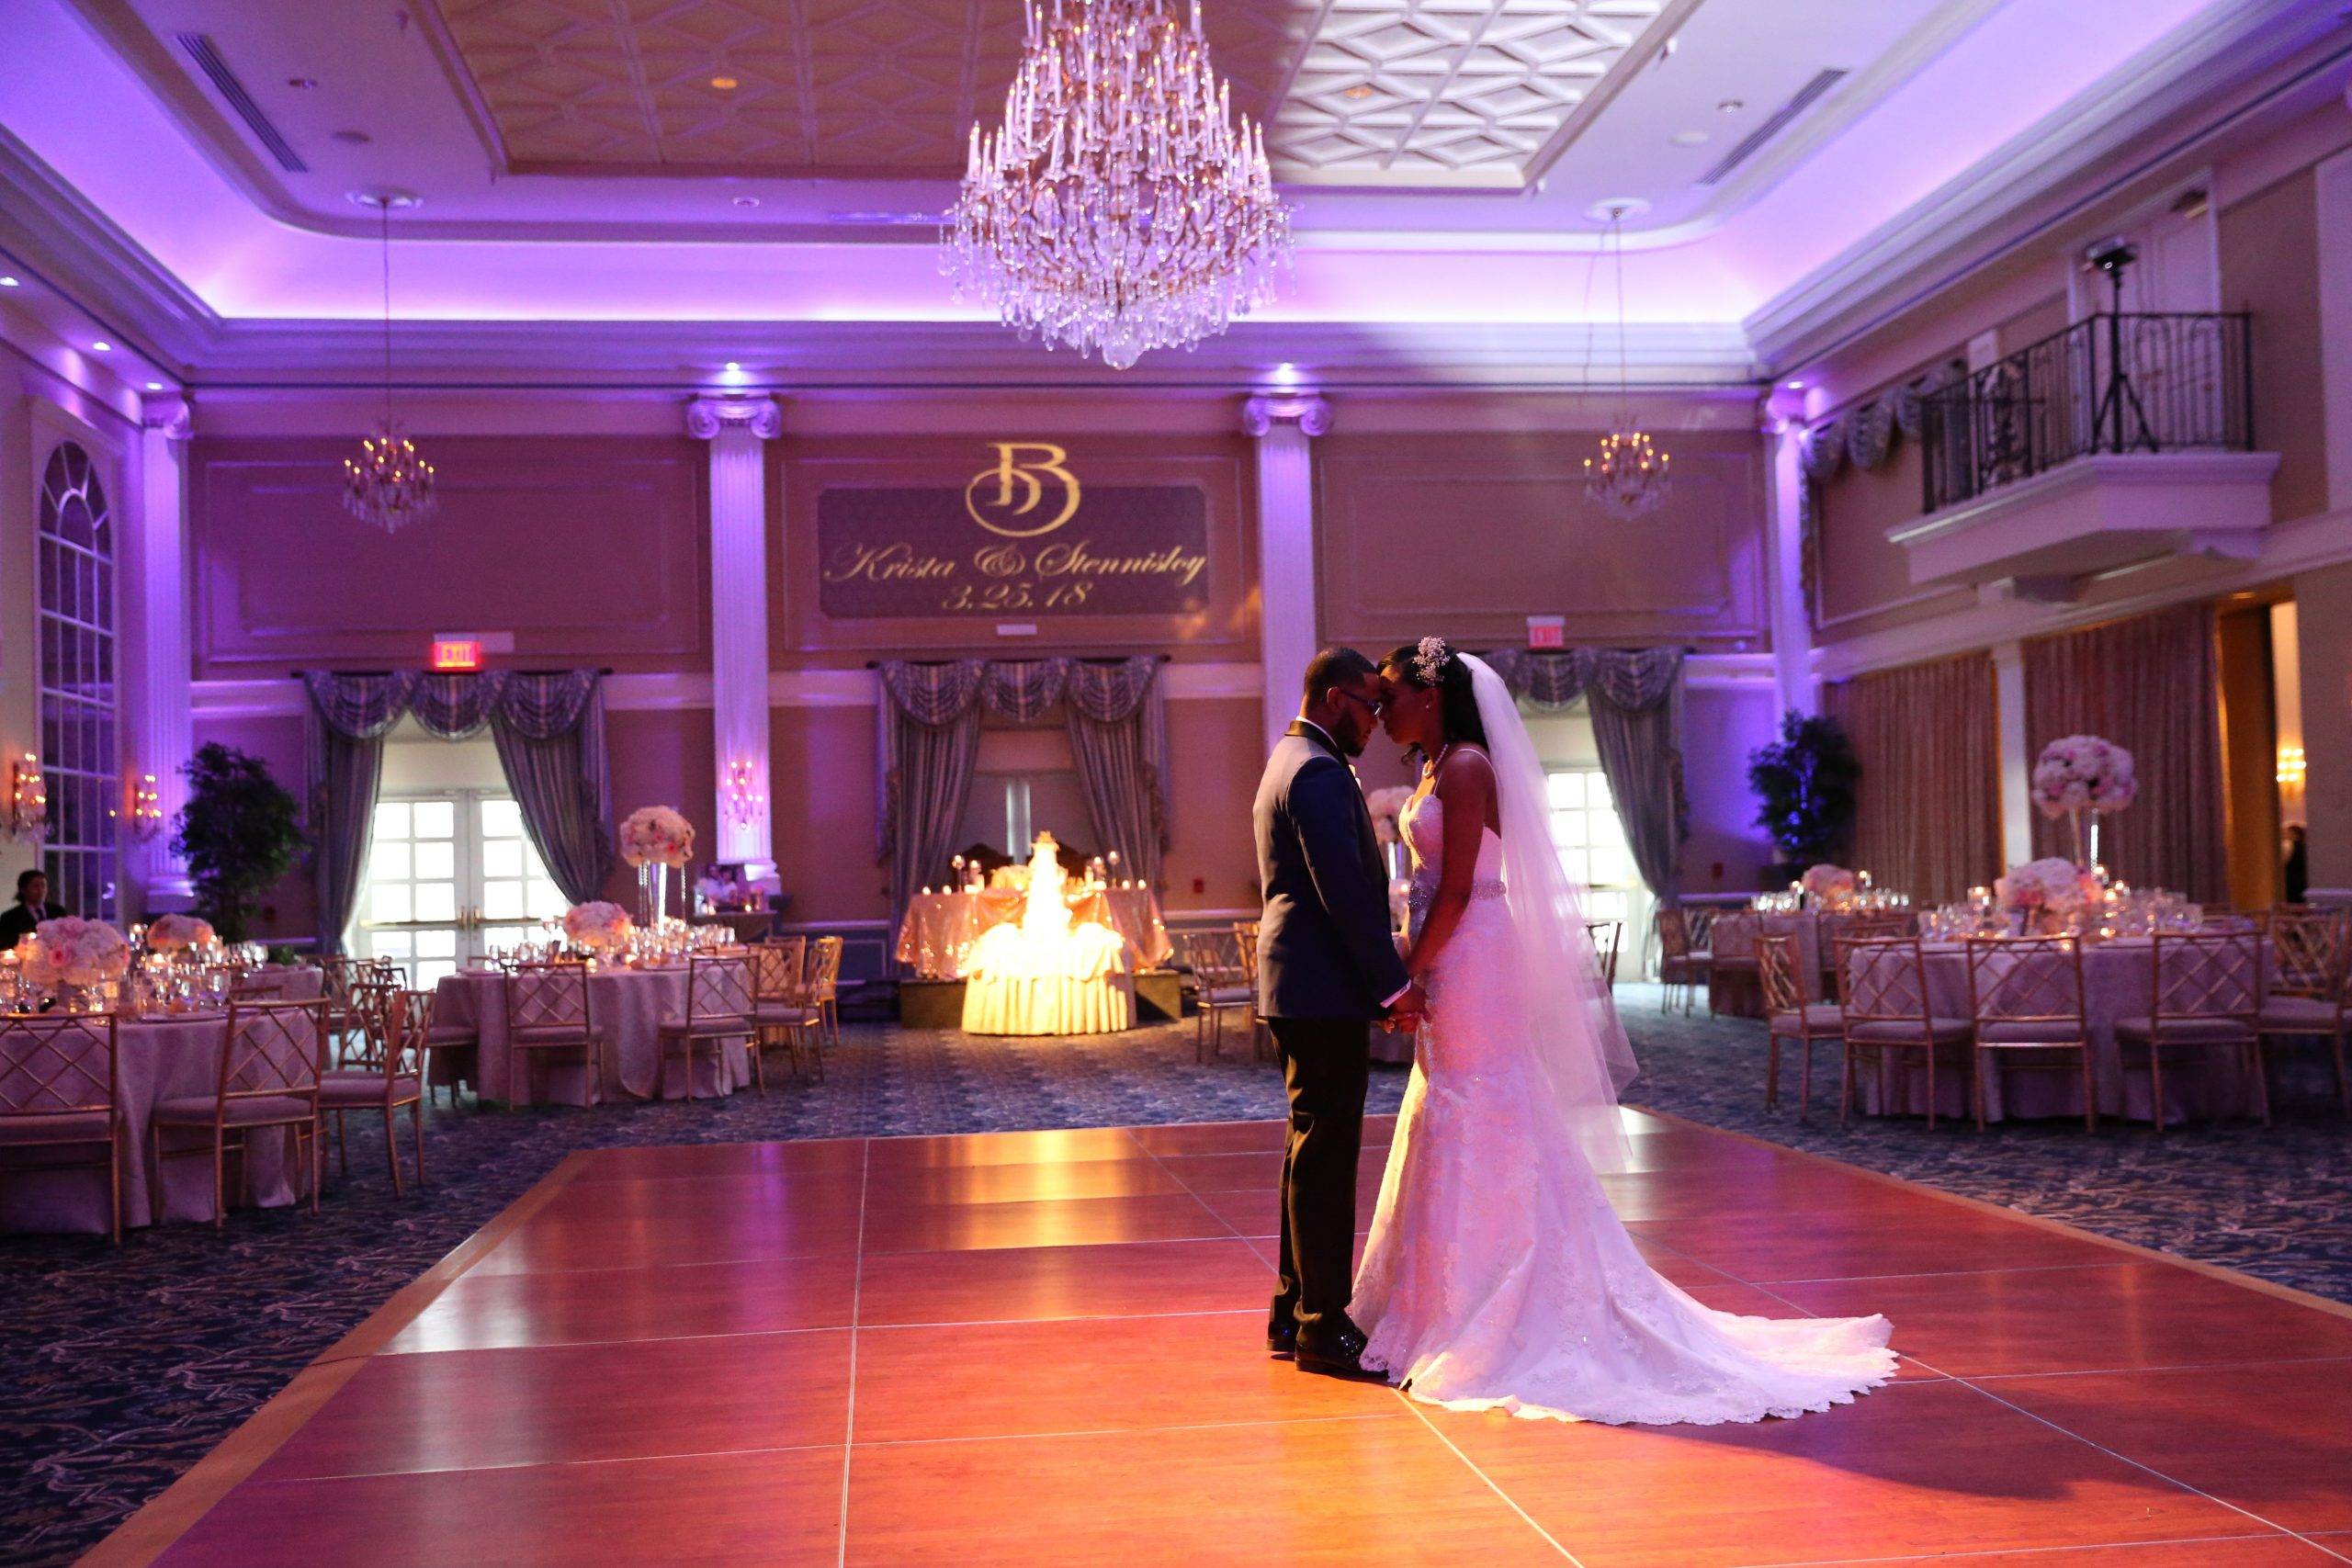 A bride and groom share their first dance in a ballroom.